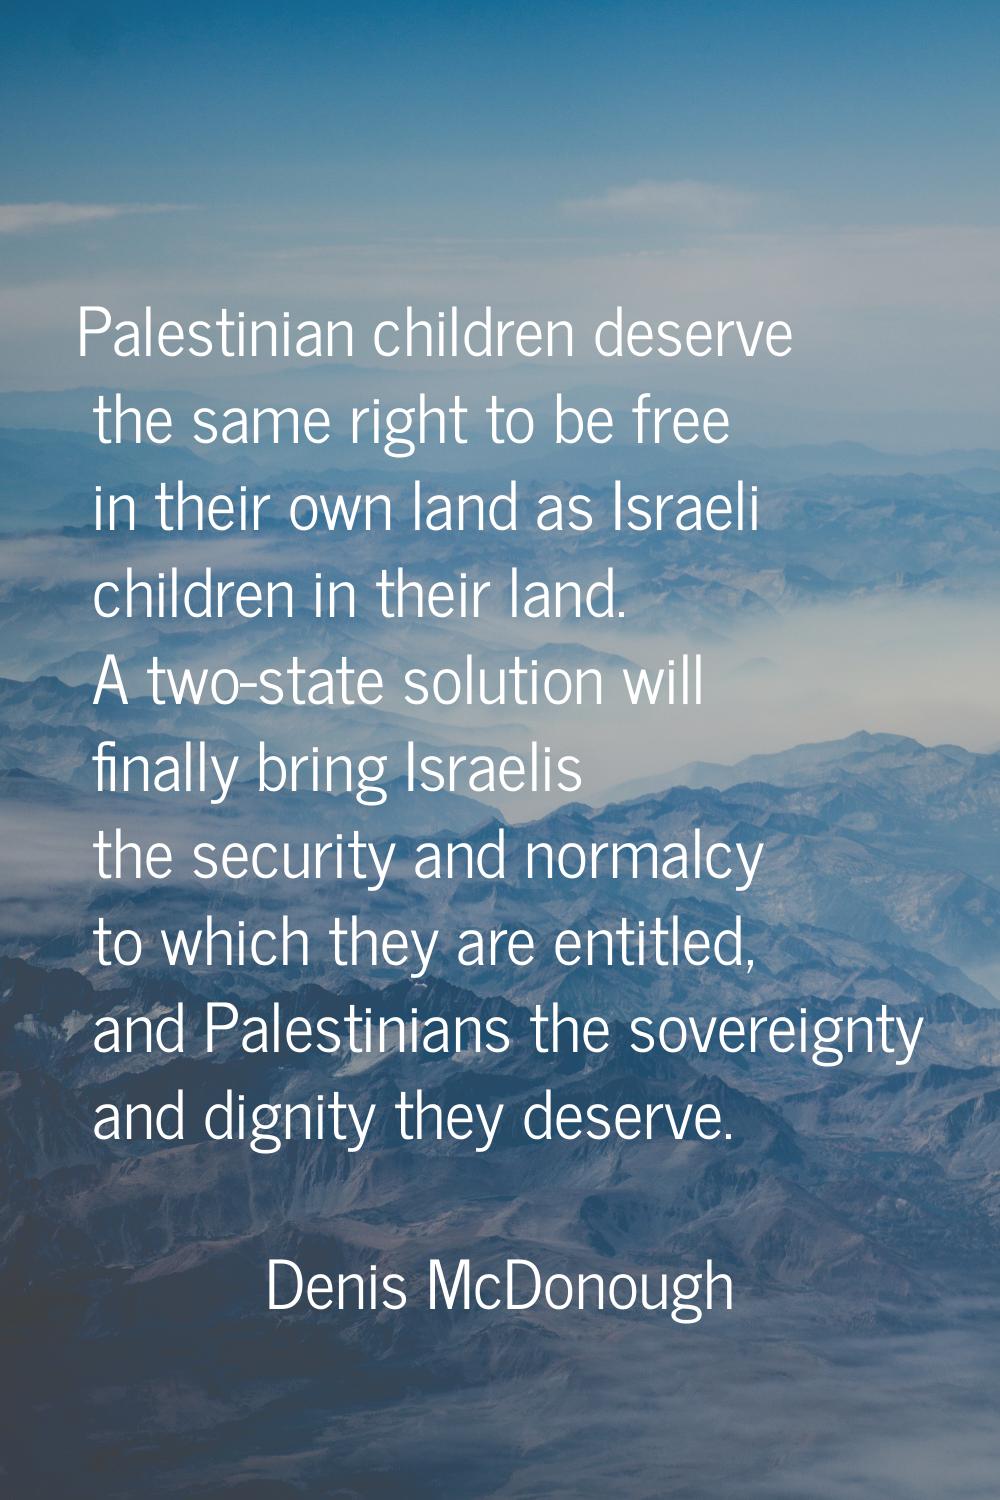 Palestinian children deserve the same right to be free in their own land as Israeli children in the